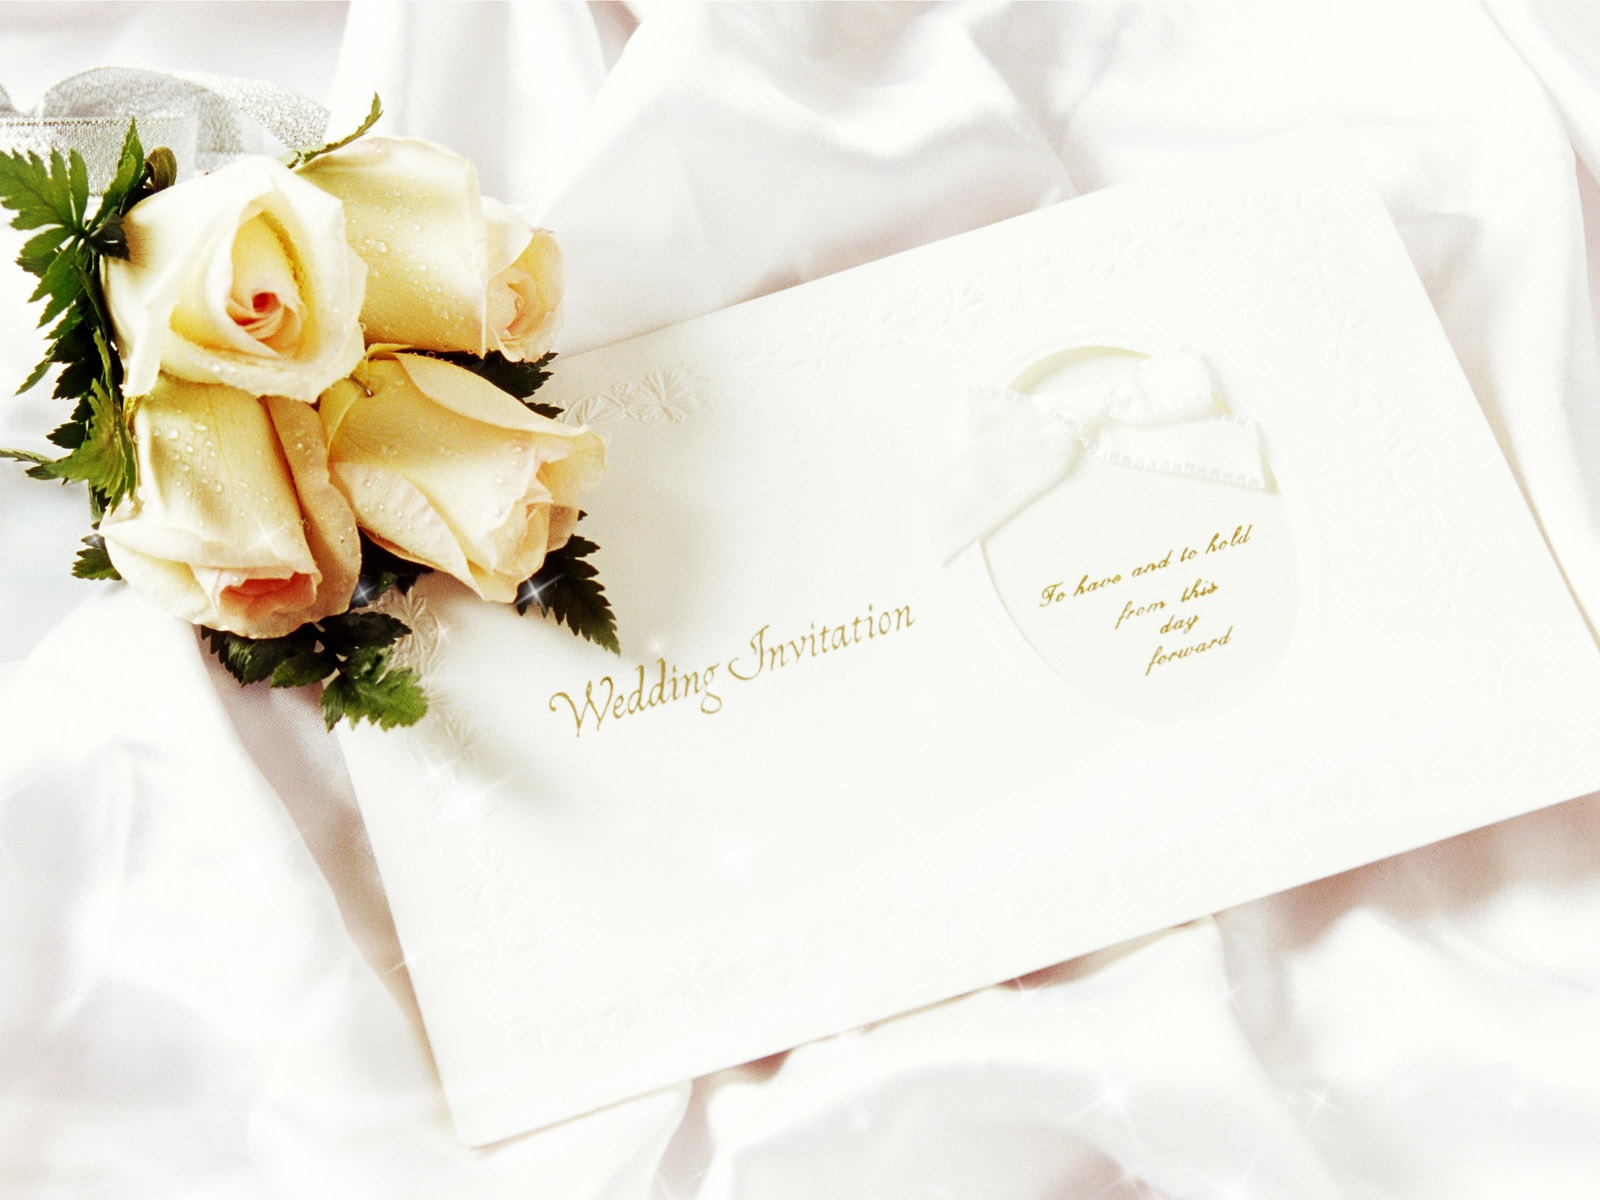 Weddings and Flowers wallpaper (1) #6 - 1600x1200